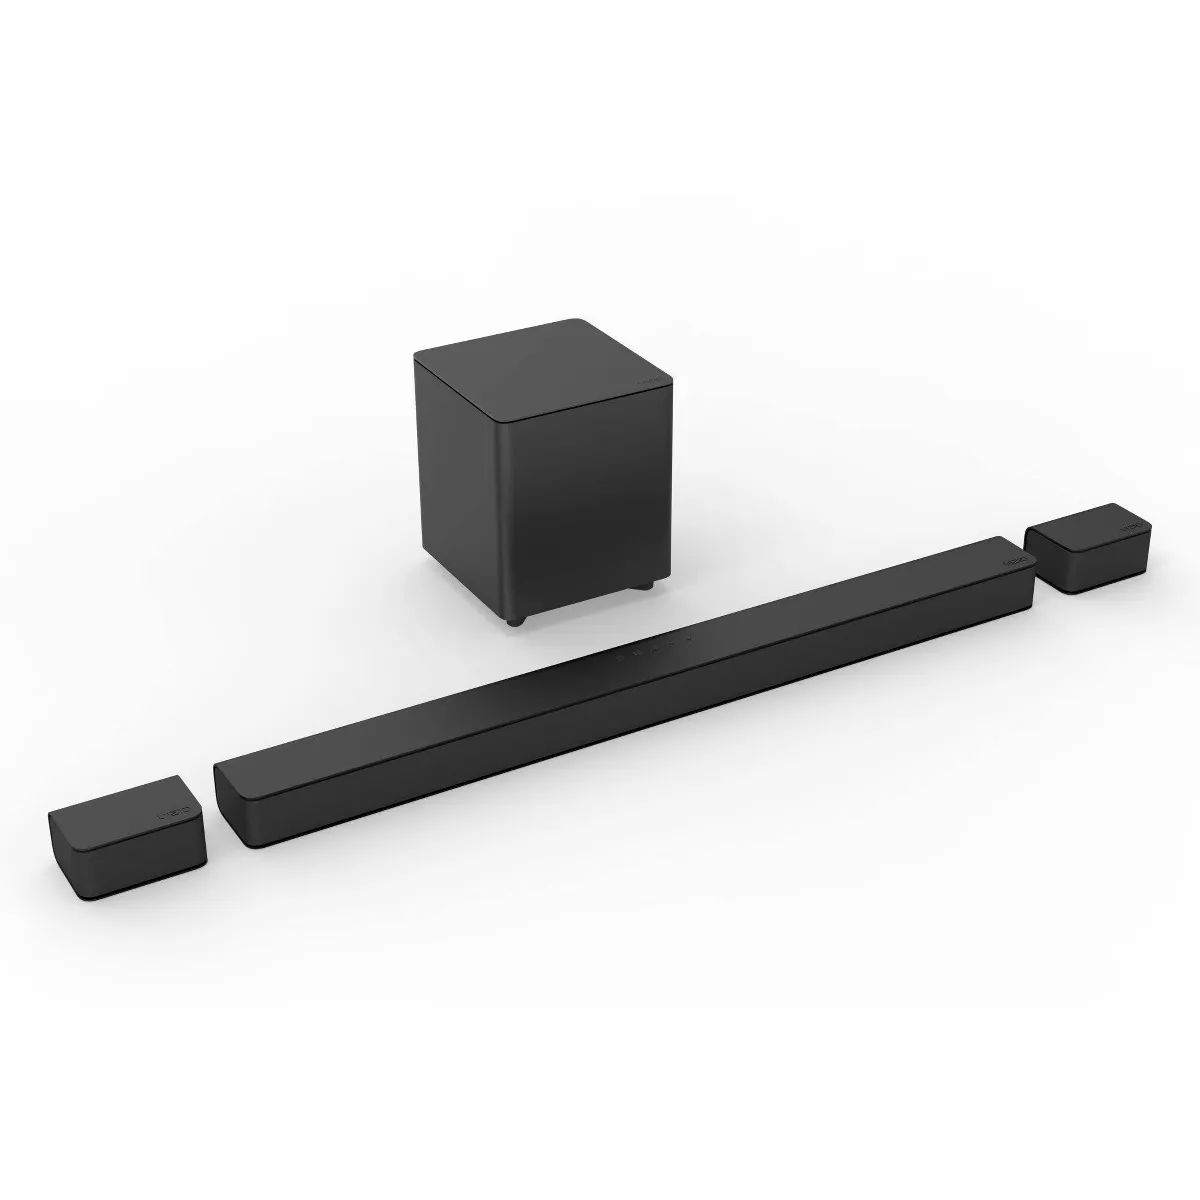 VIZIO V-Series 5.1 Home Theater Sound Bar with Dolby Audio, Bluetooth - V51-H6 | Target